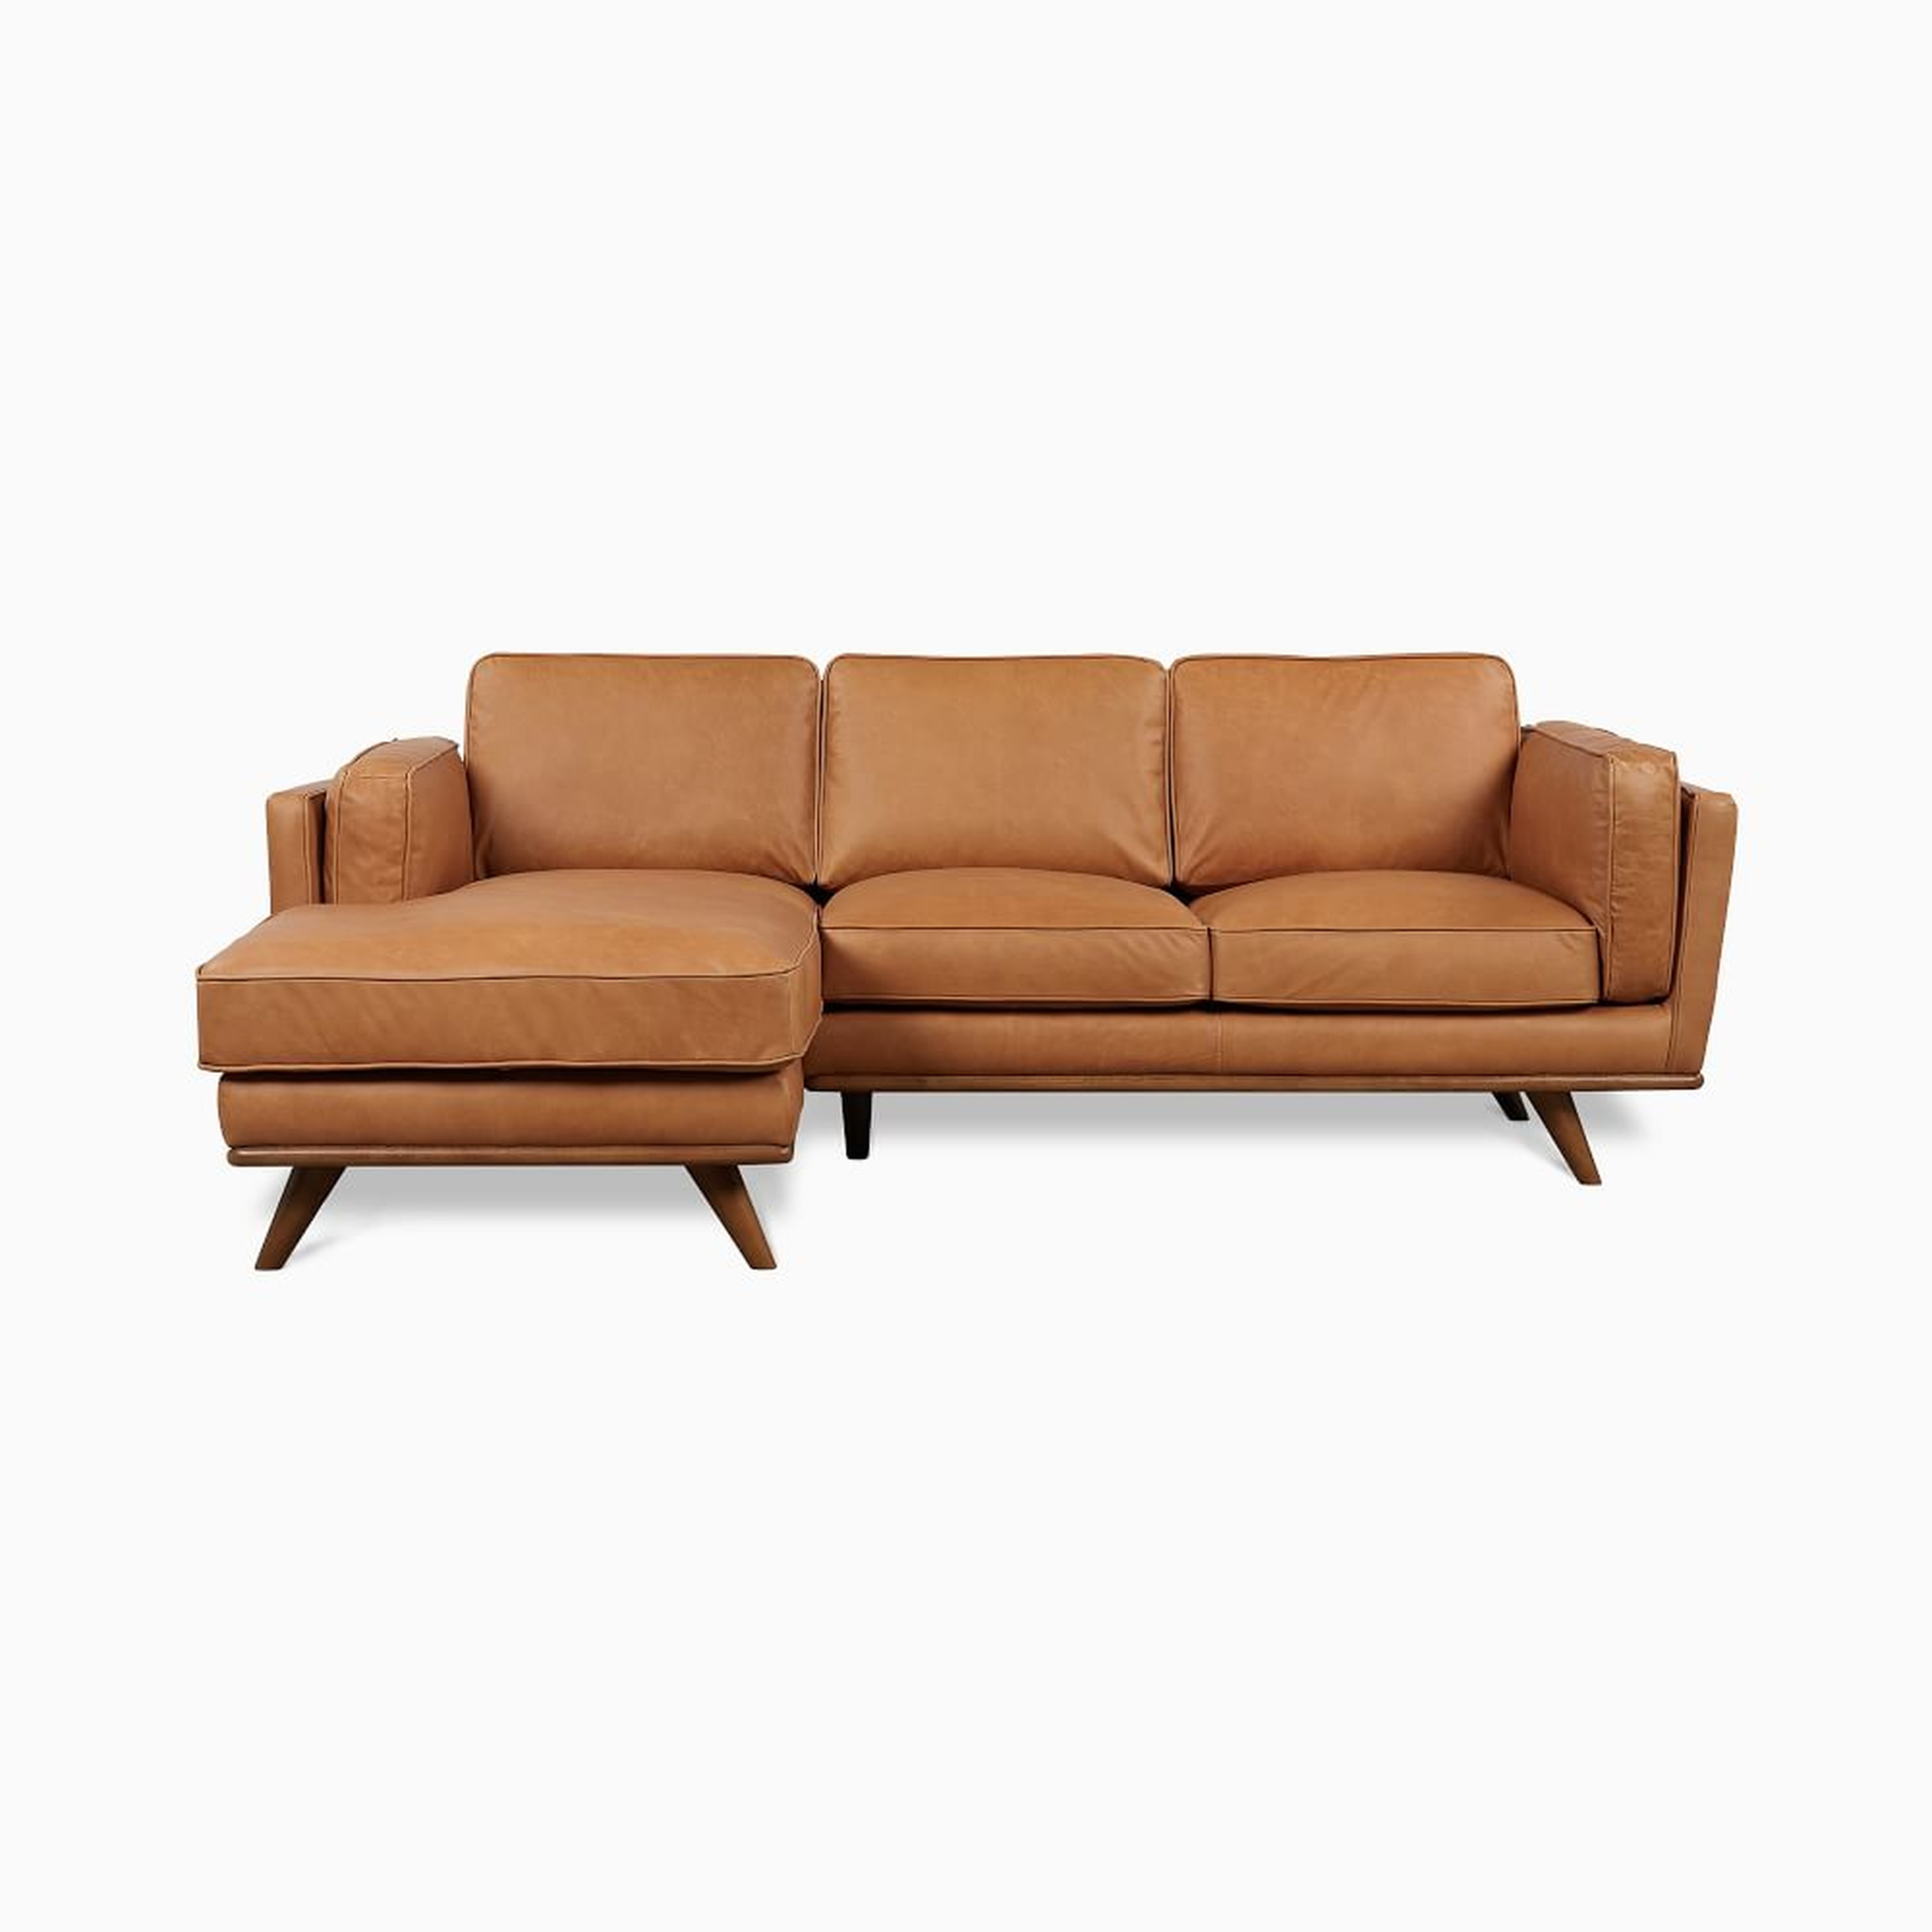 Zander 94" Left 2-Piece Chaise Sectional, Charme Leather, Tan, Almond - West Elm